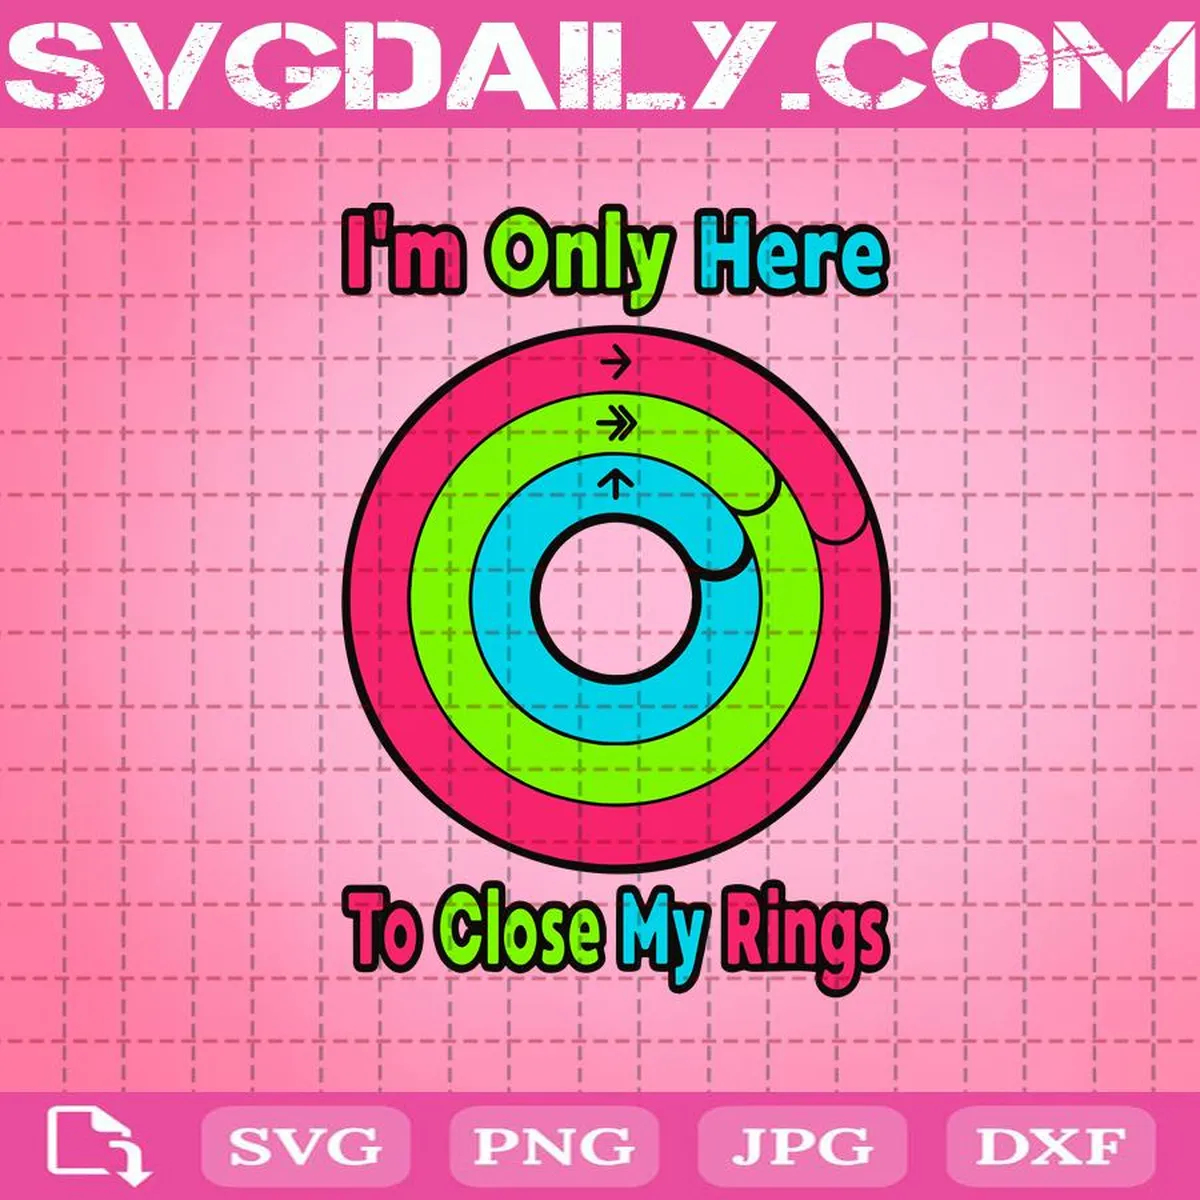 I'm Only Here To Close My Ring Svg, Close My Ring Svg, Activity Rings Svg, Apple Watch Svg, Workout Svg, Exercise Rings Svg